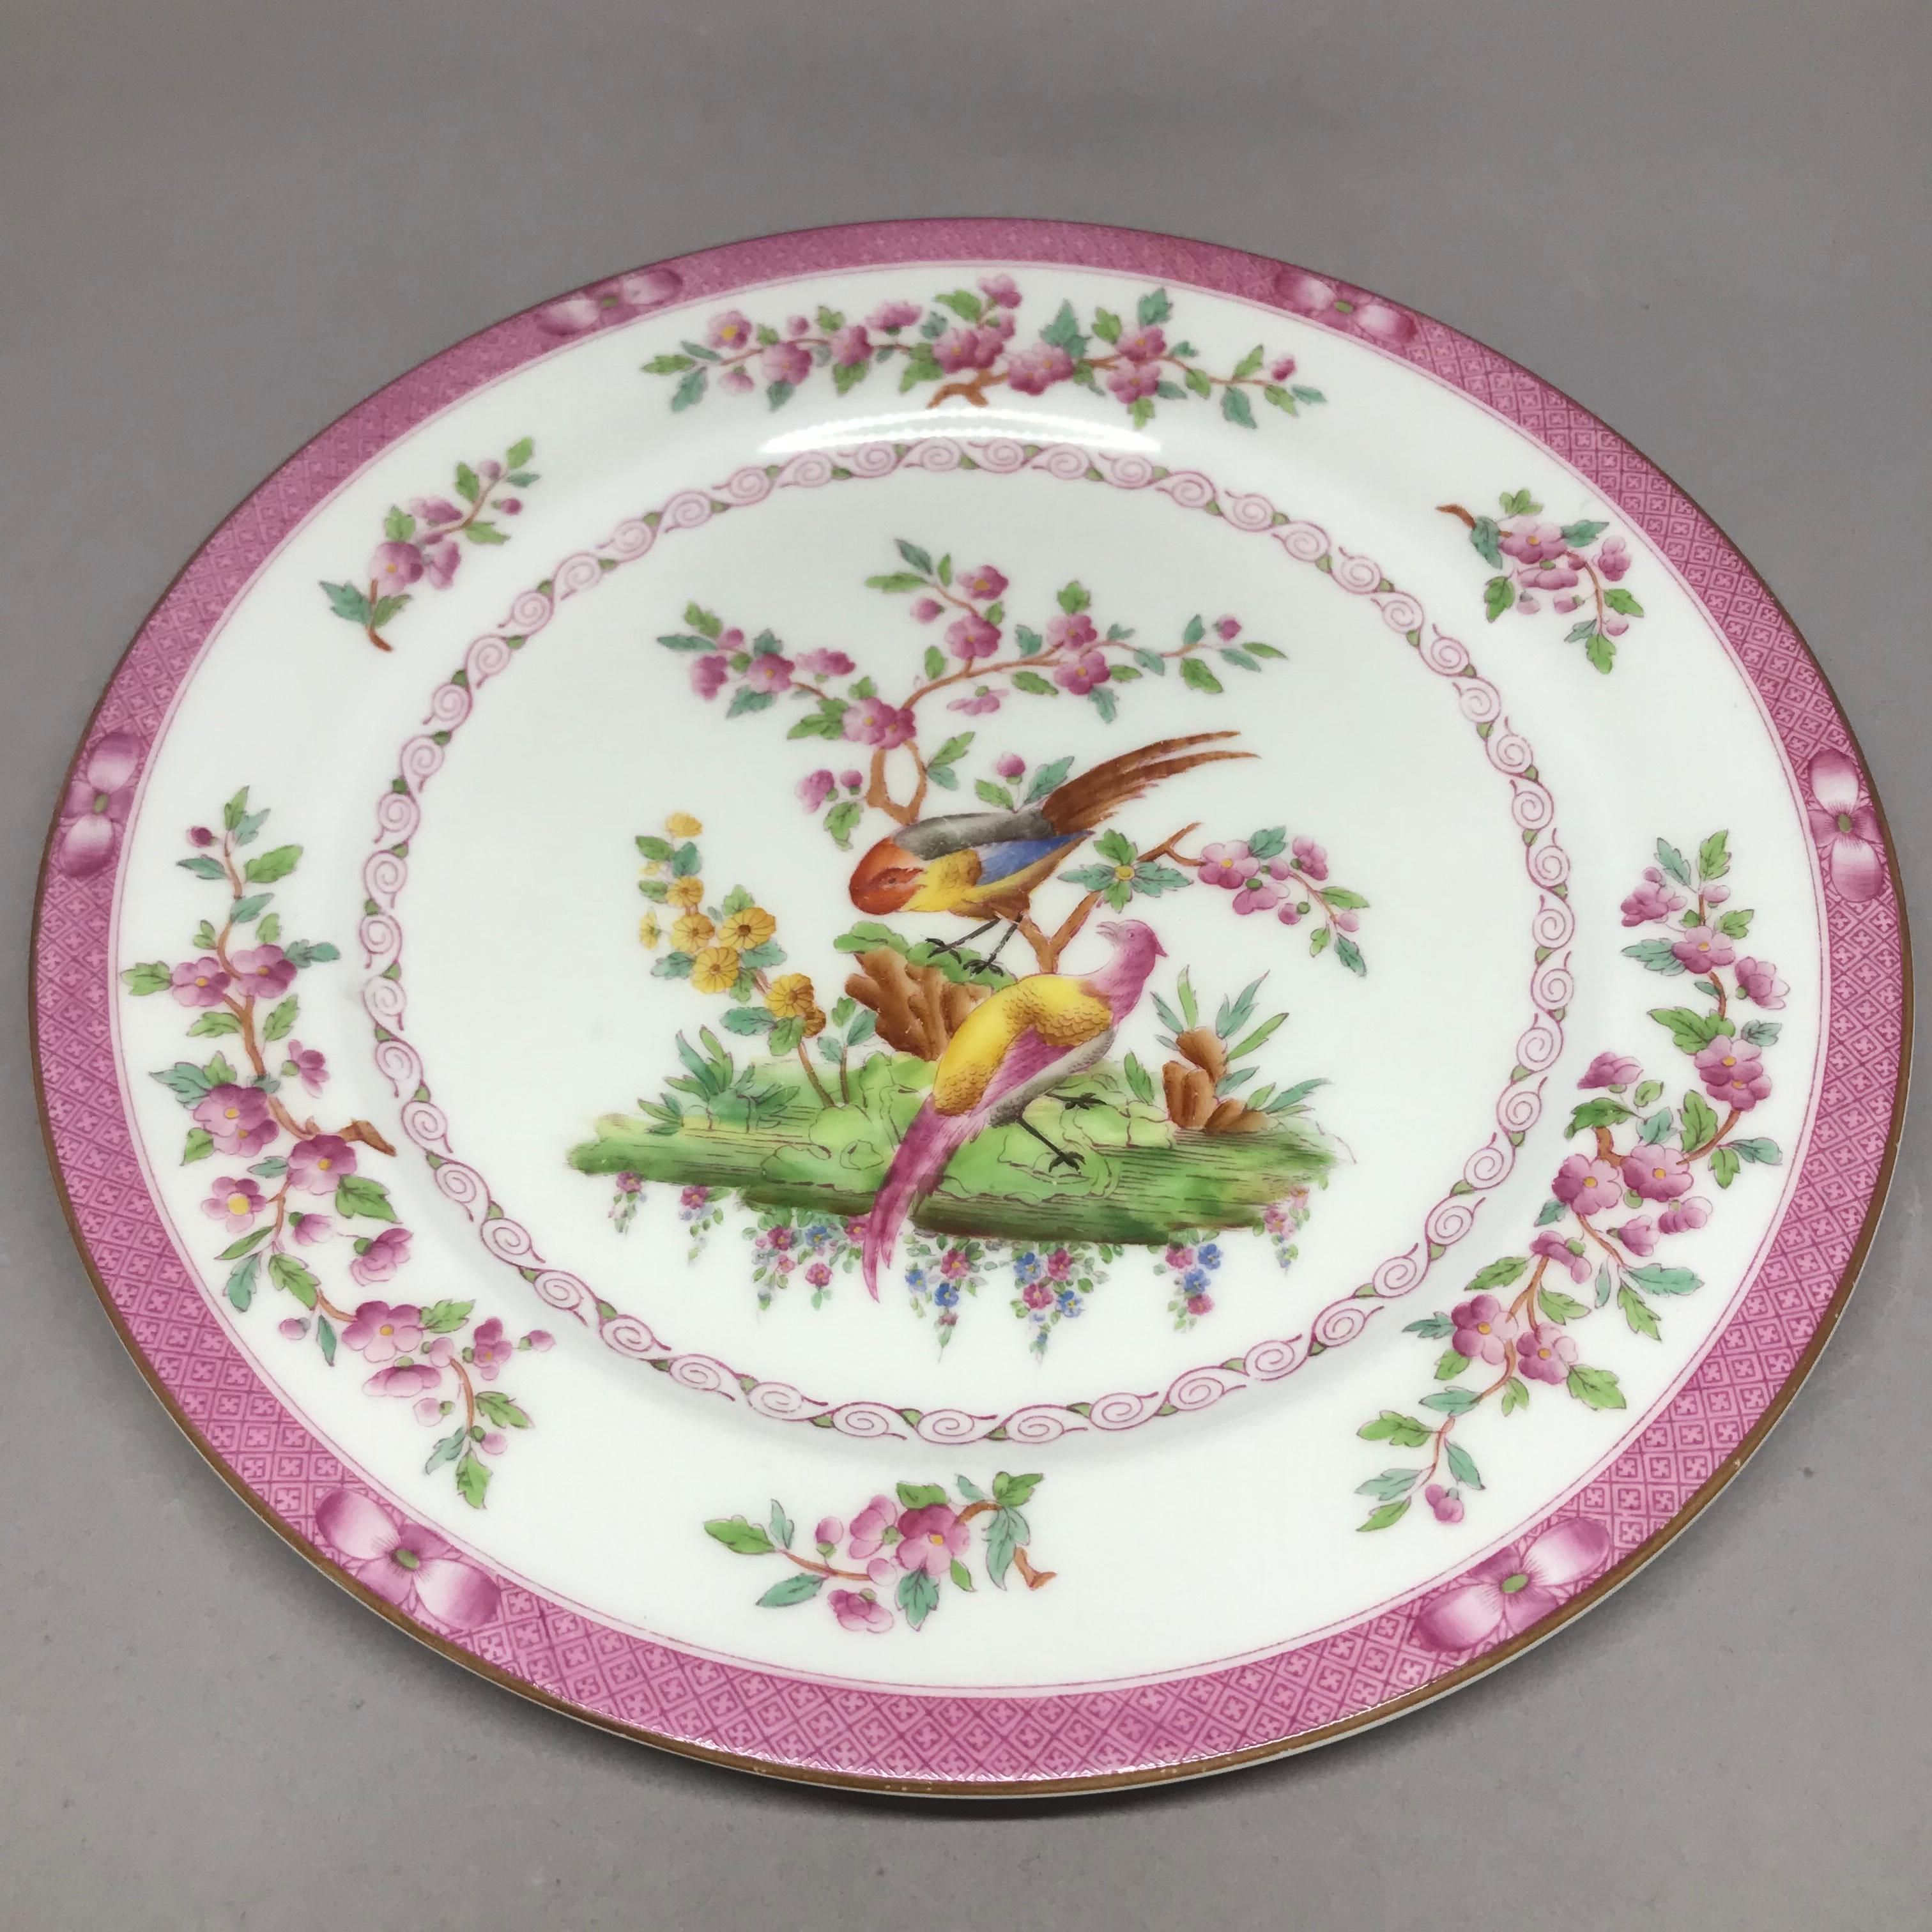 Set of ten pink bird plates. Ten pink rimmed and floral banded chinoiserie style dinner plates centering on a pair of exotic colored pheasants in a landscape. Markings for Royal Worcester England retailed by Bailey Banks & Biddle of Philadelphia.